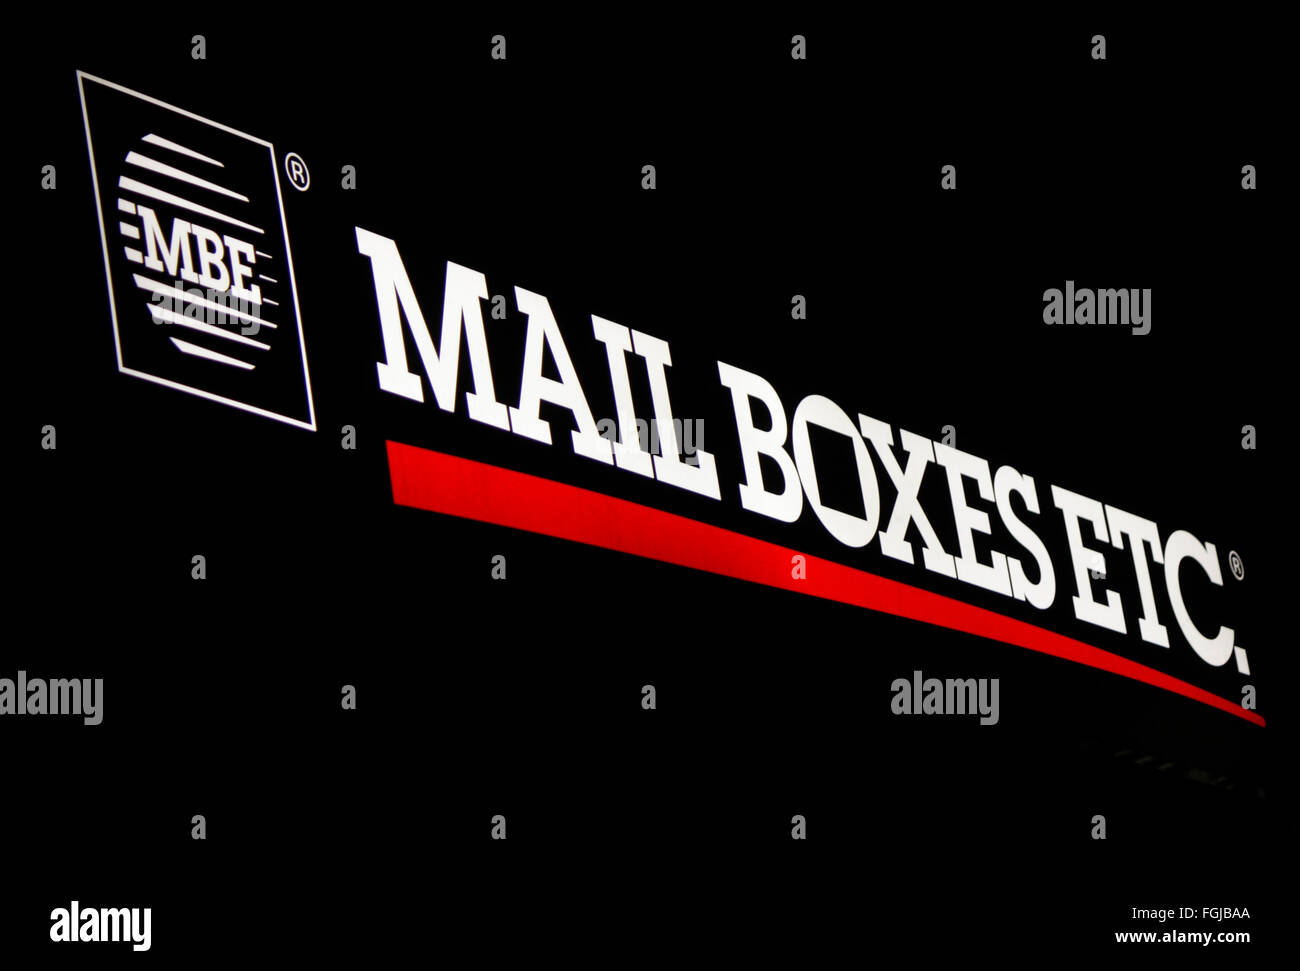 Markenname: "MBE Mail Boxes etc.", Berlin. Stockfoto